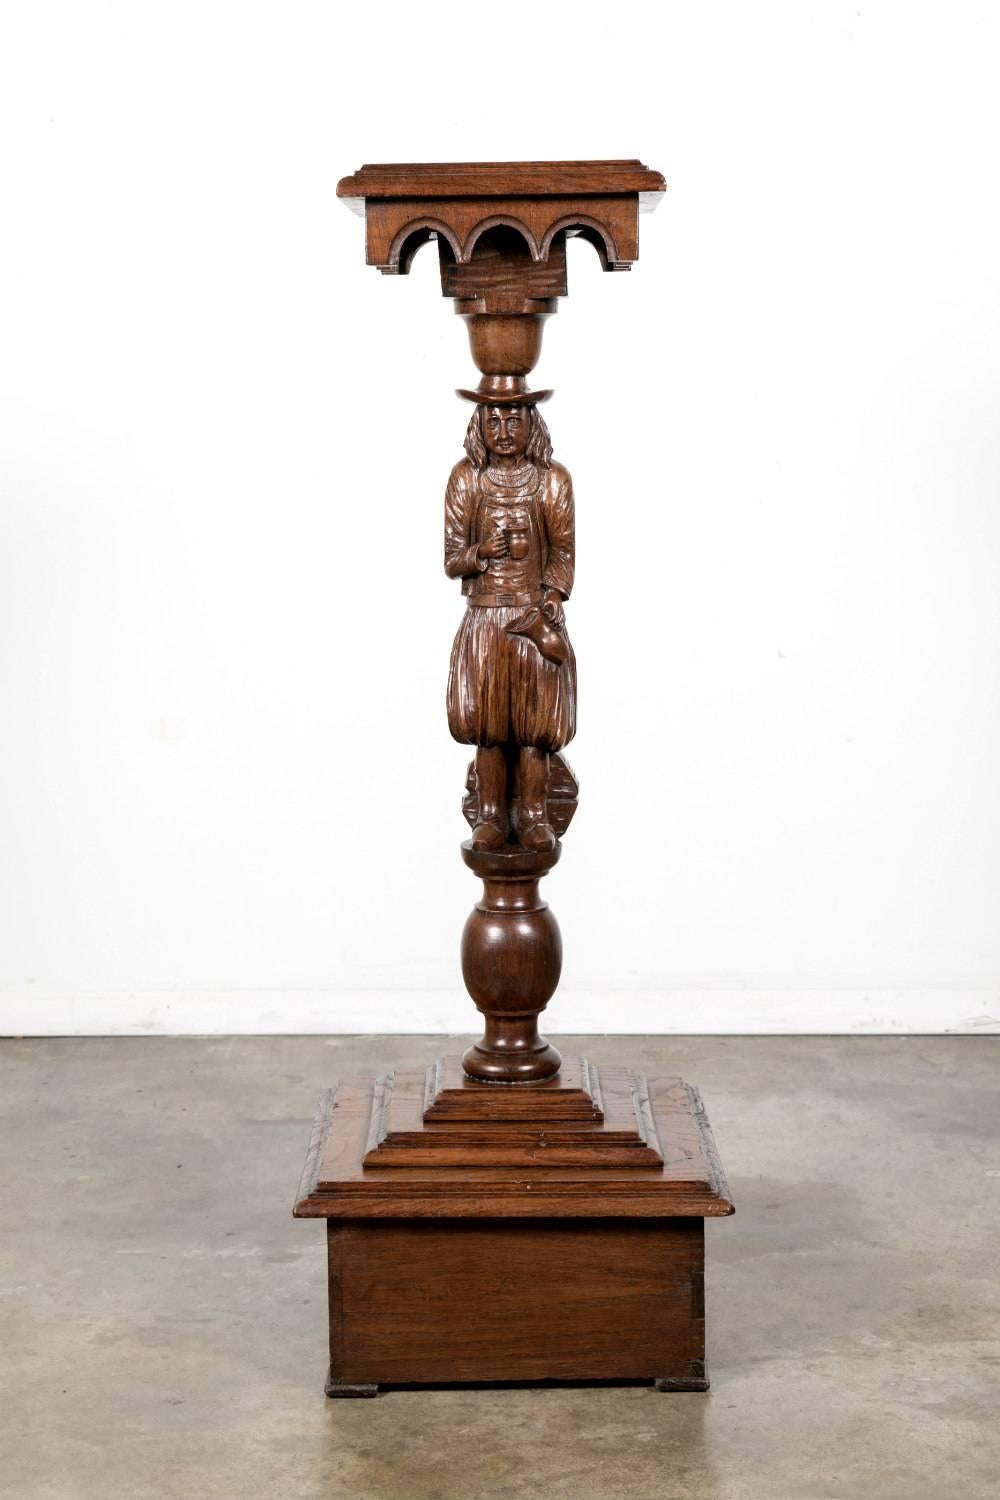 A charming 19th century French plant stand hand-carved in solid chestnut of a Breton man in traditional dress and hat pouring himself another pitcher of wine. In classic Breton style, it will add a Country French touch to any space. 

Antique